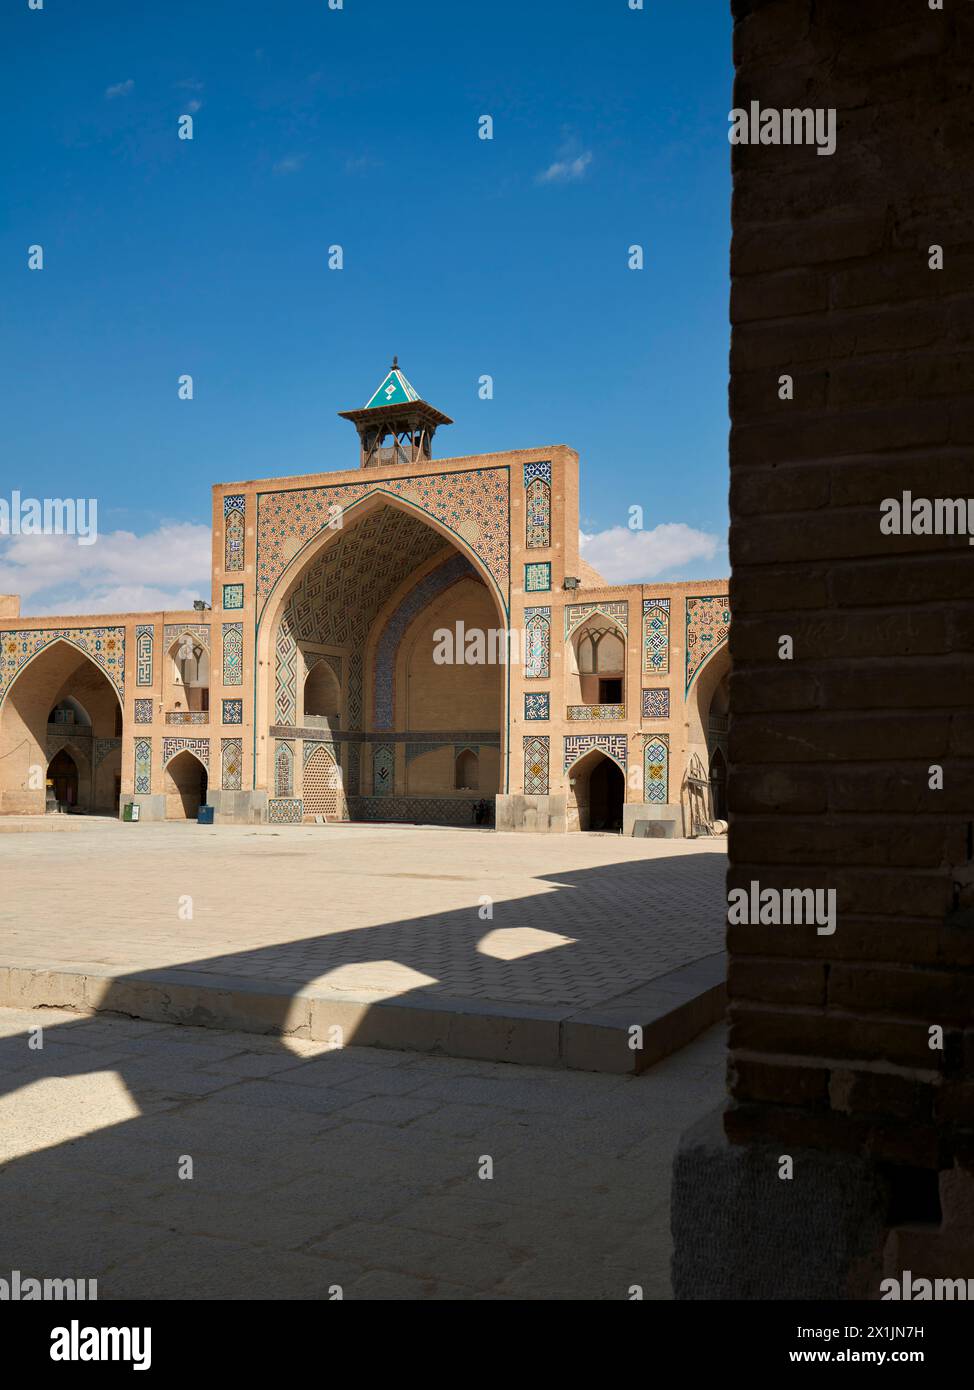 Courtyard view of the 17th century Hakim Mosque in the historic center of Isfahan, Iran. Stock Photo